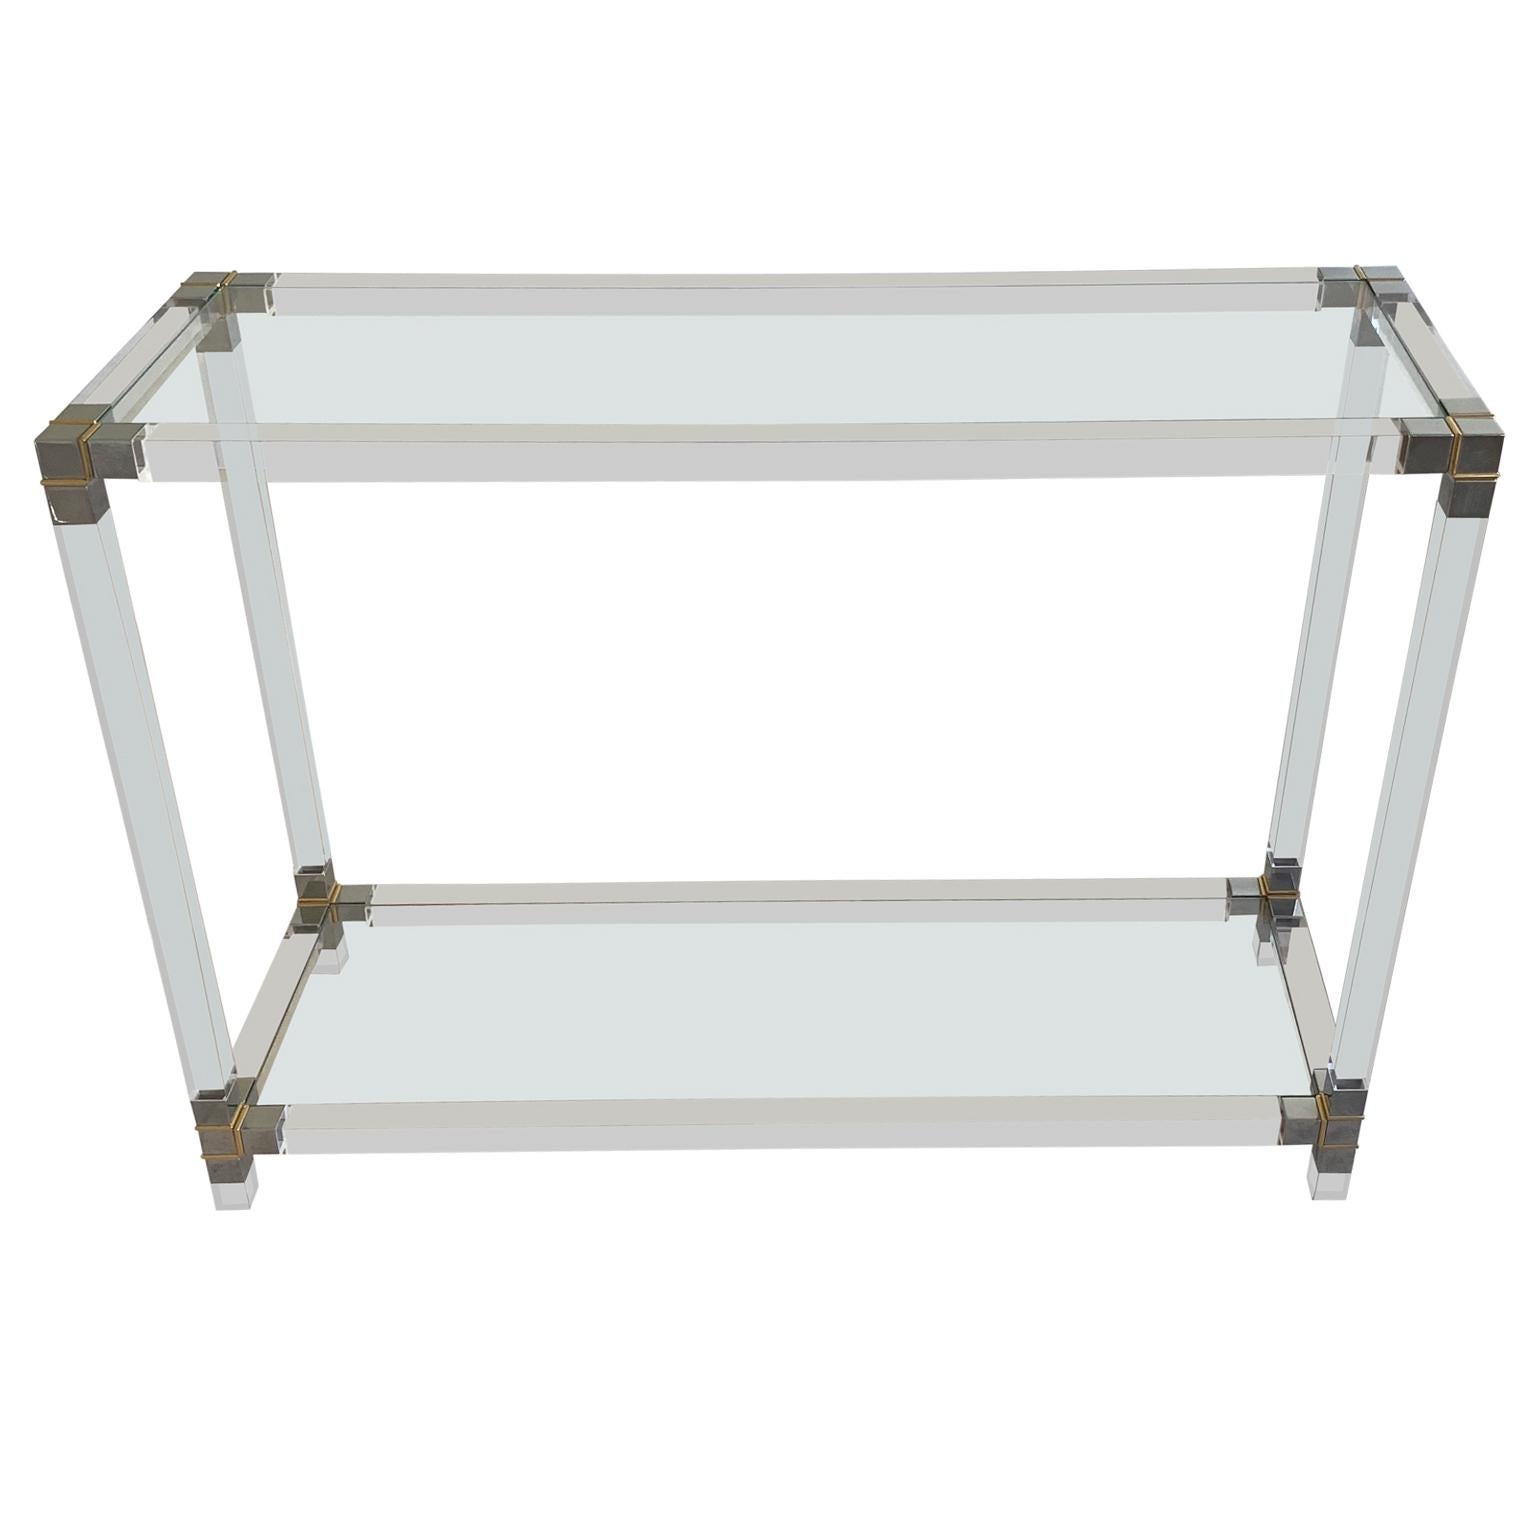 Mid-Century Modern Glass-Top Console Table in Lucite, Polished Nickel and Brass